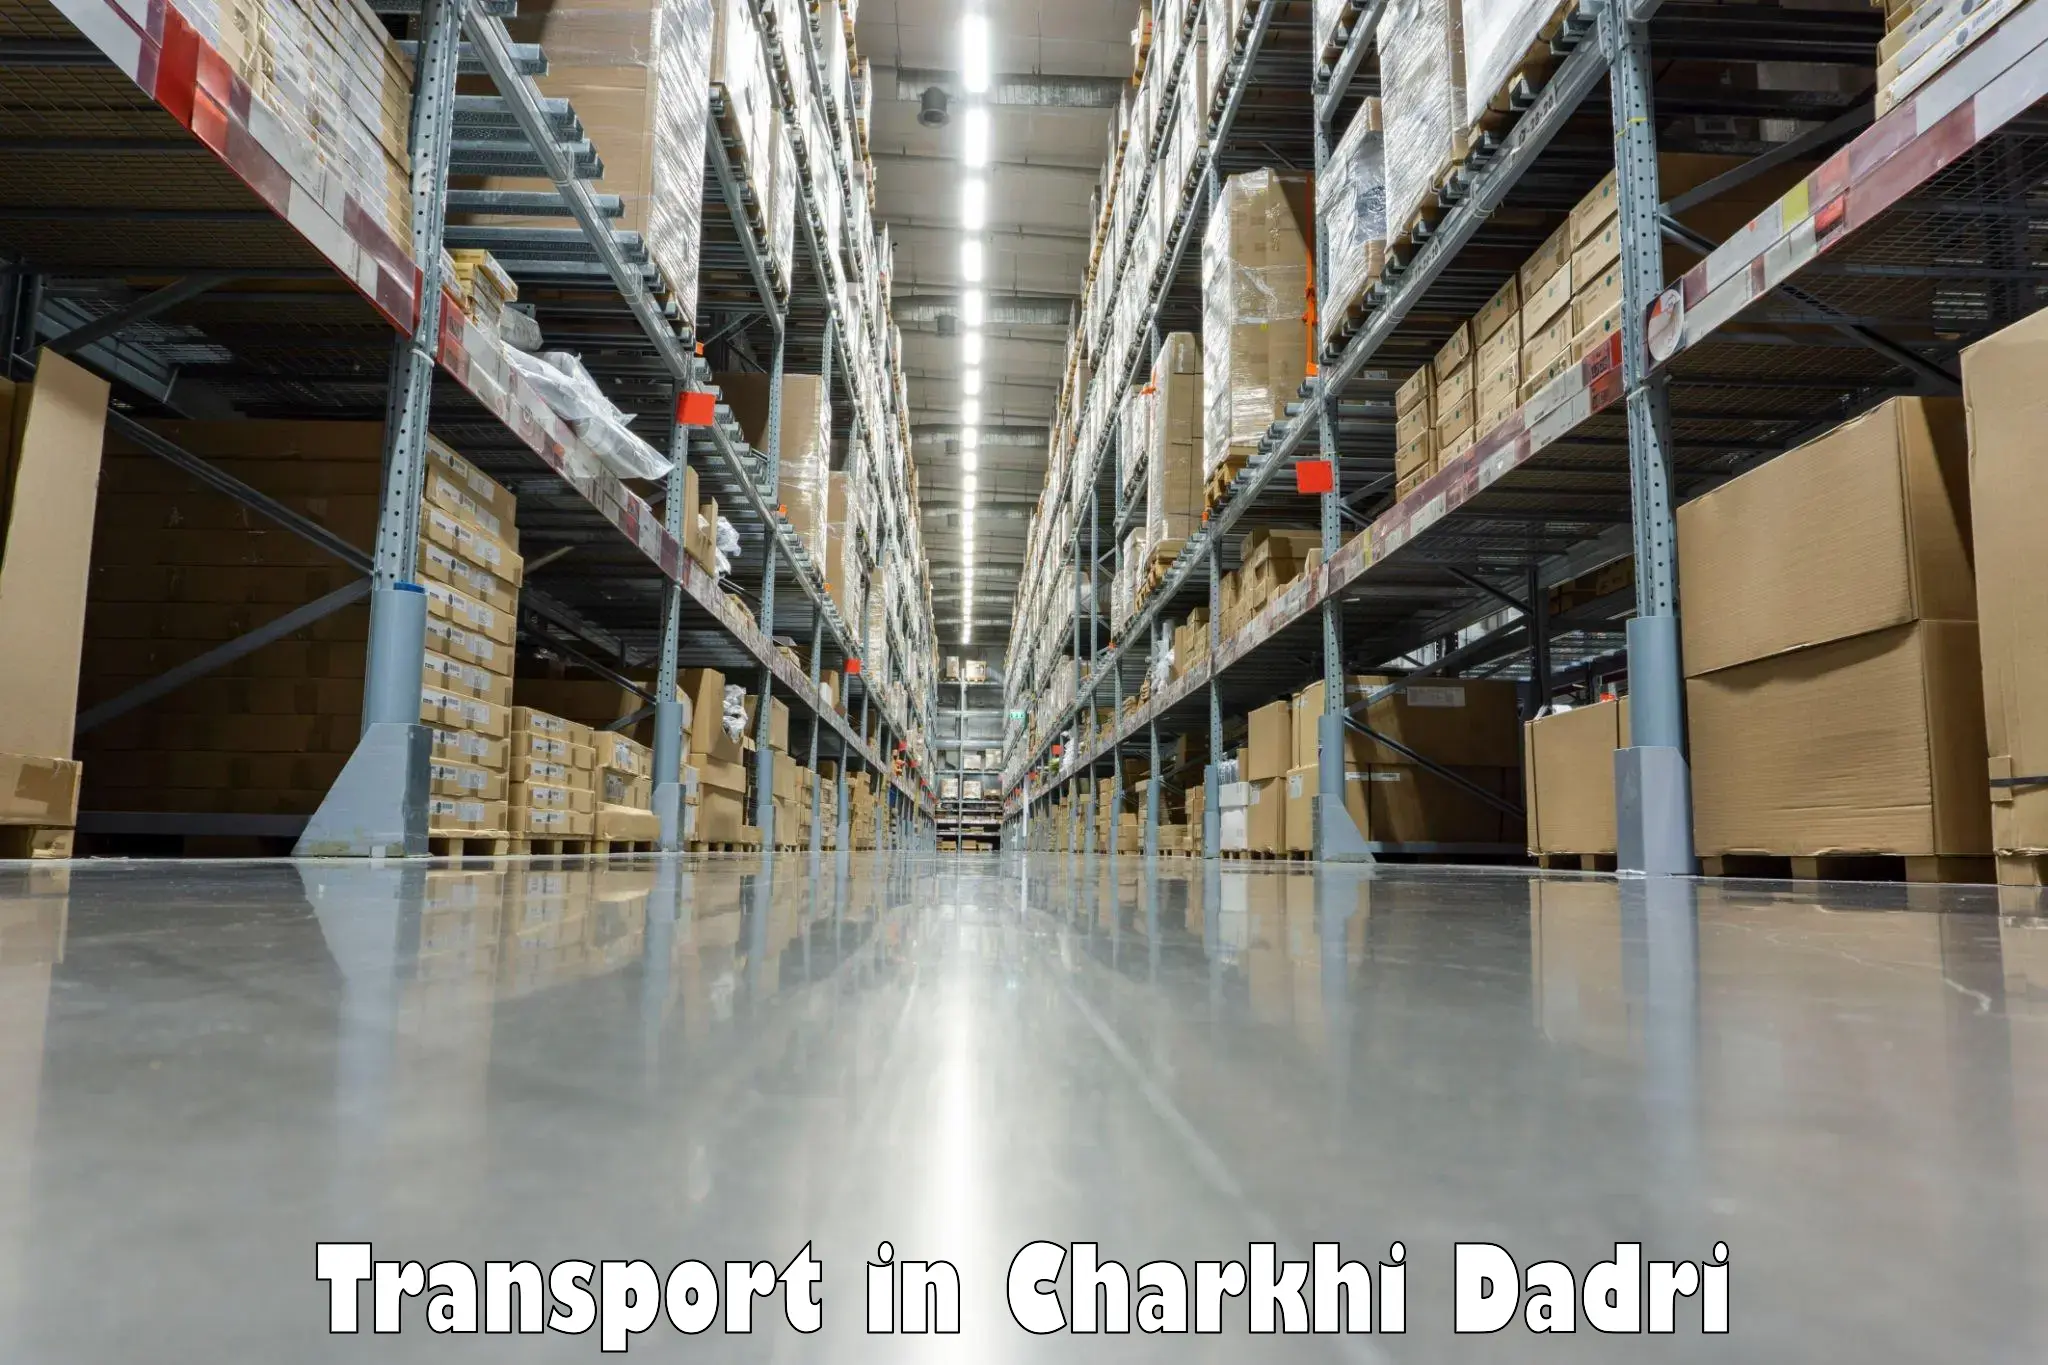 Road transport online services in Charkhi Dadri